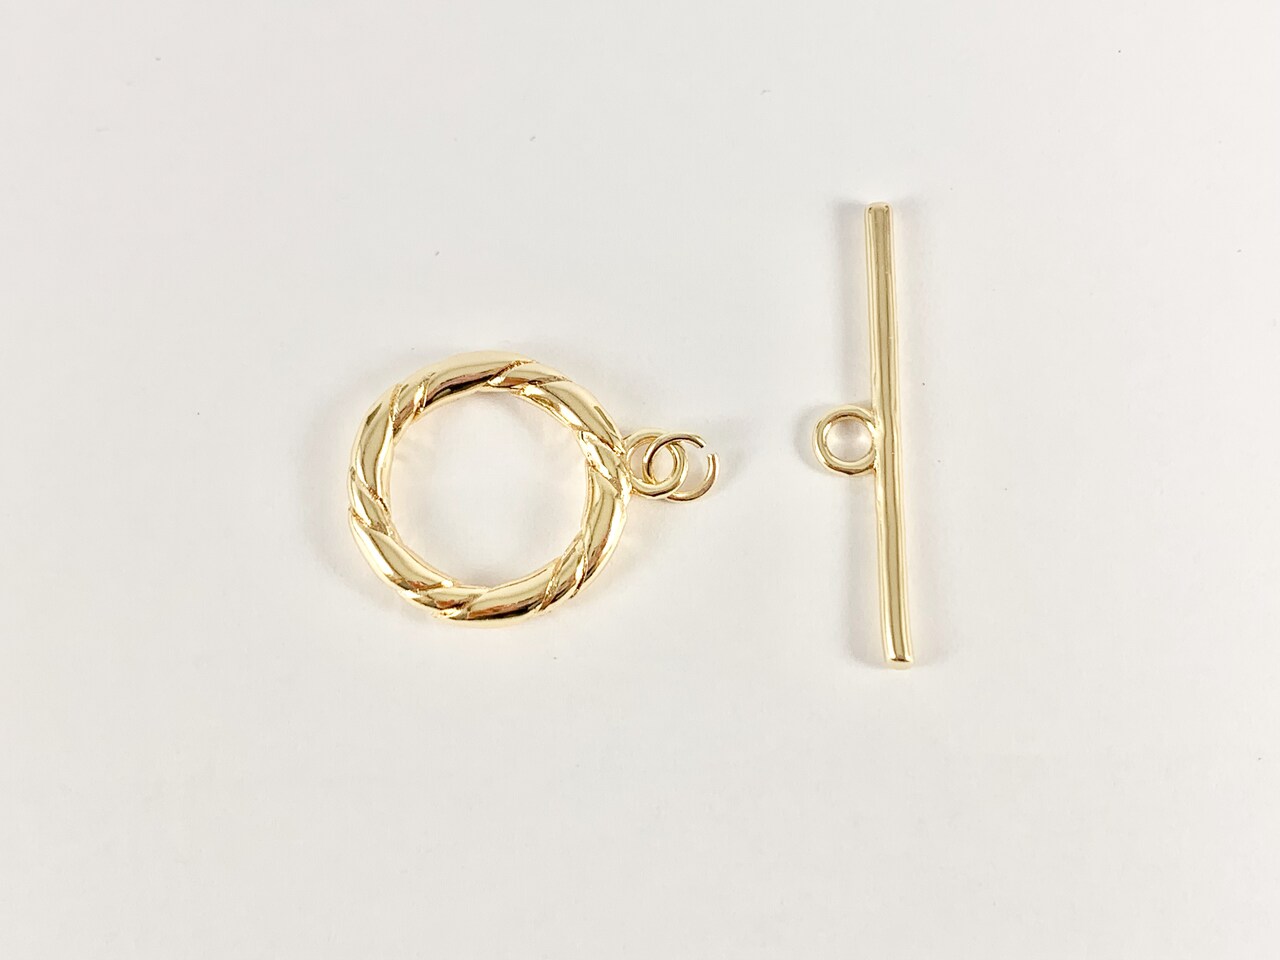 Toggle Clasp Findings Gold Silver Twisted Roped Toggle Clasps 20mm in 18K Gold or Silver Plated Copper 1 set